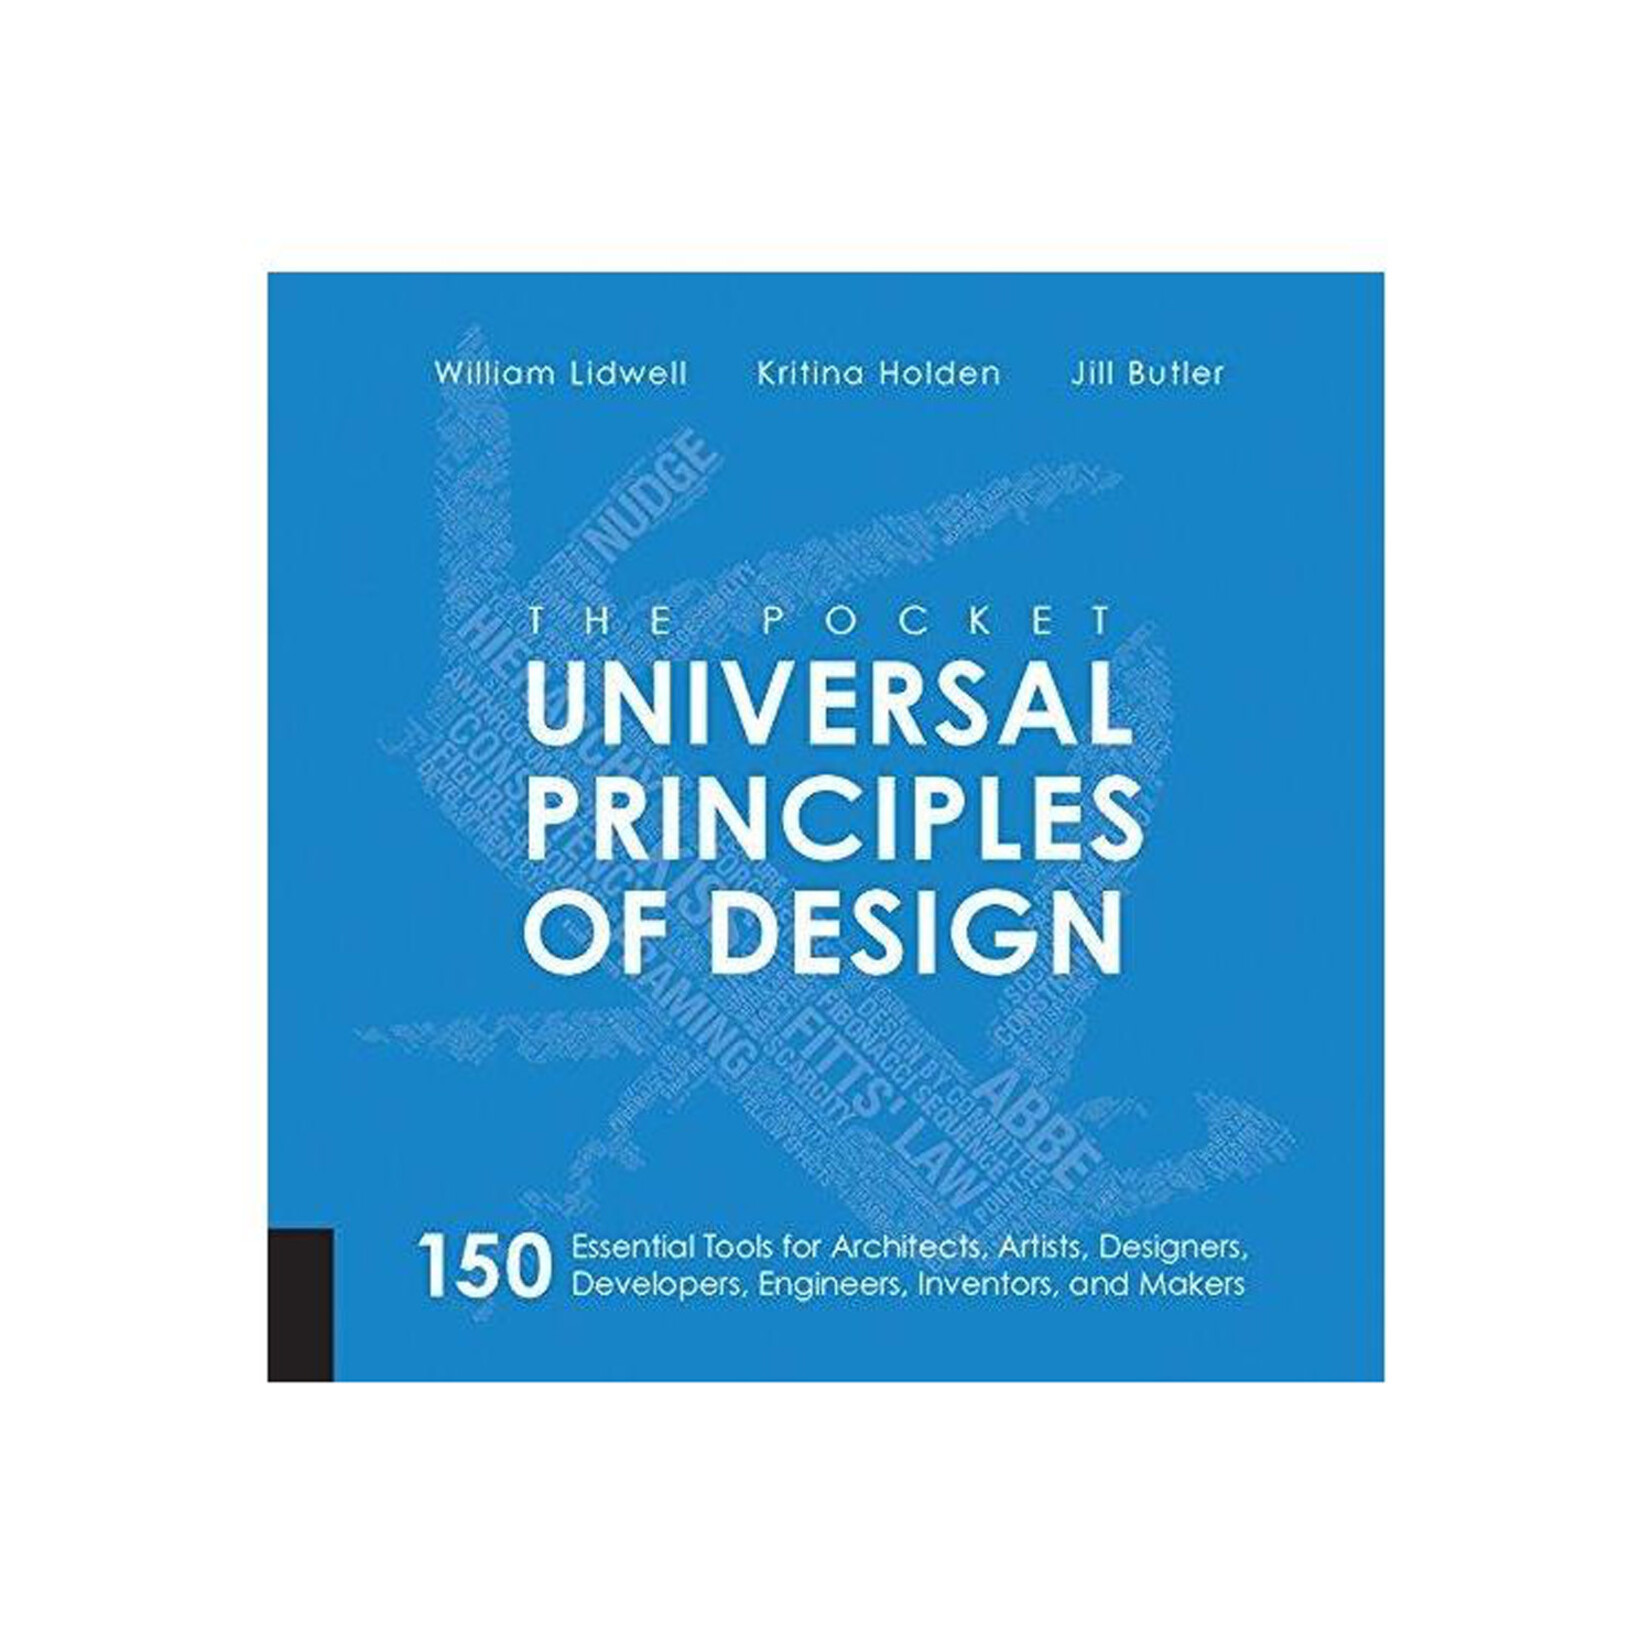 Pocket Universal Principles of Design: 150 Essential Tools for Architects, Artists, Designers, Developers, Engineers, Inventors, and Makers